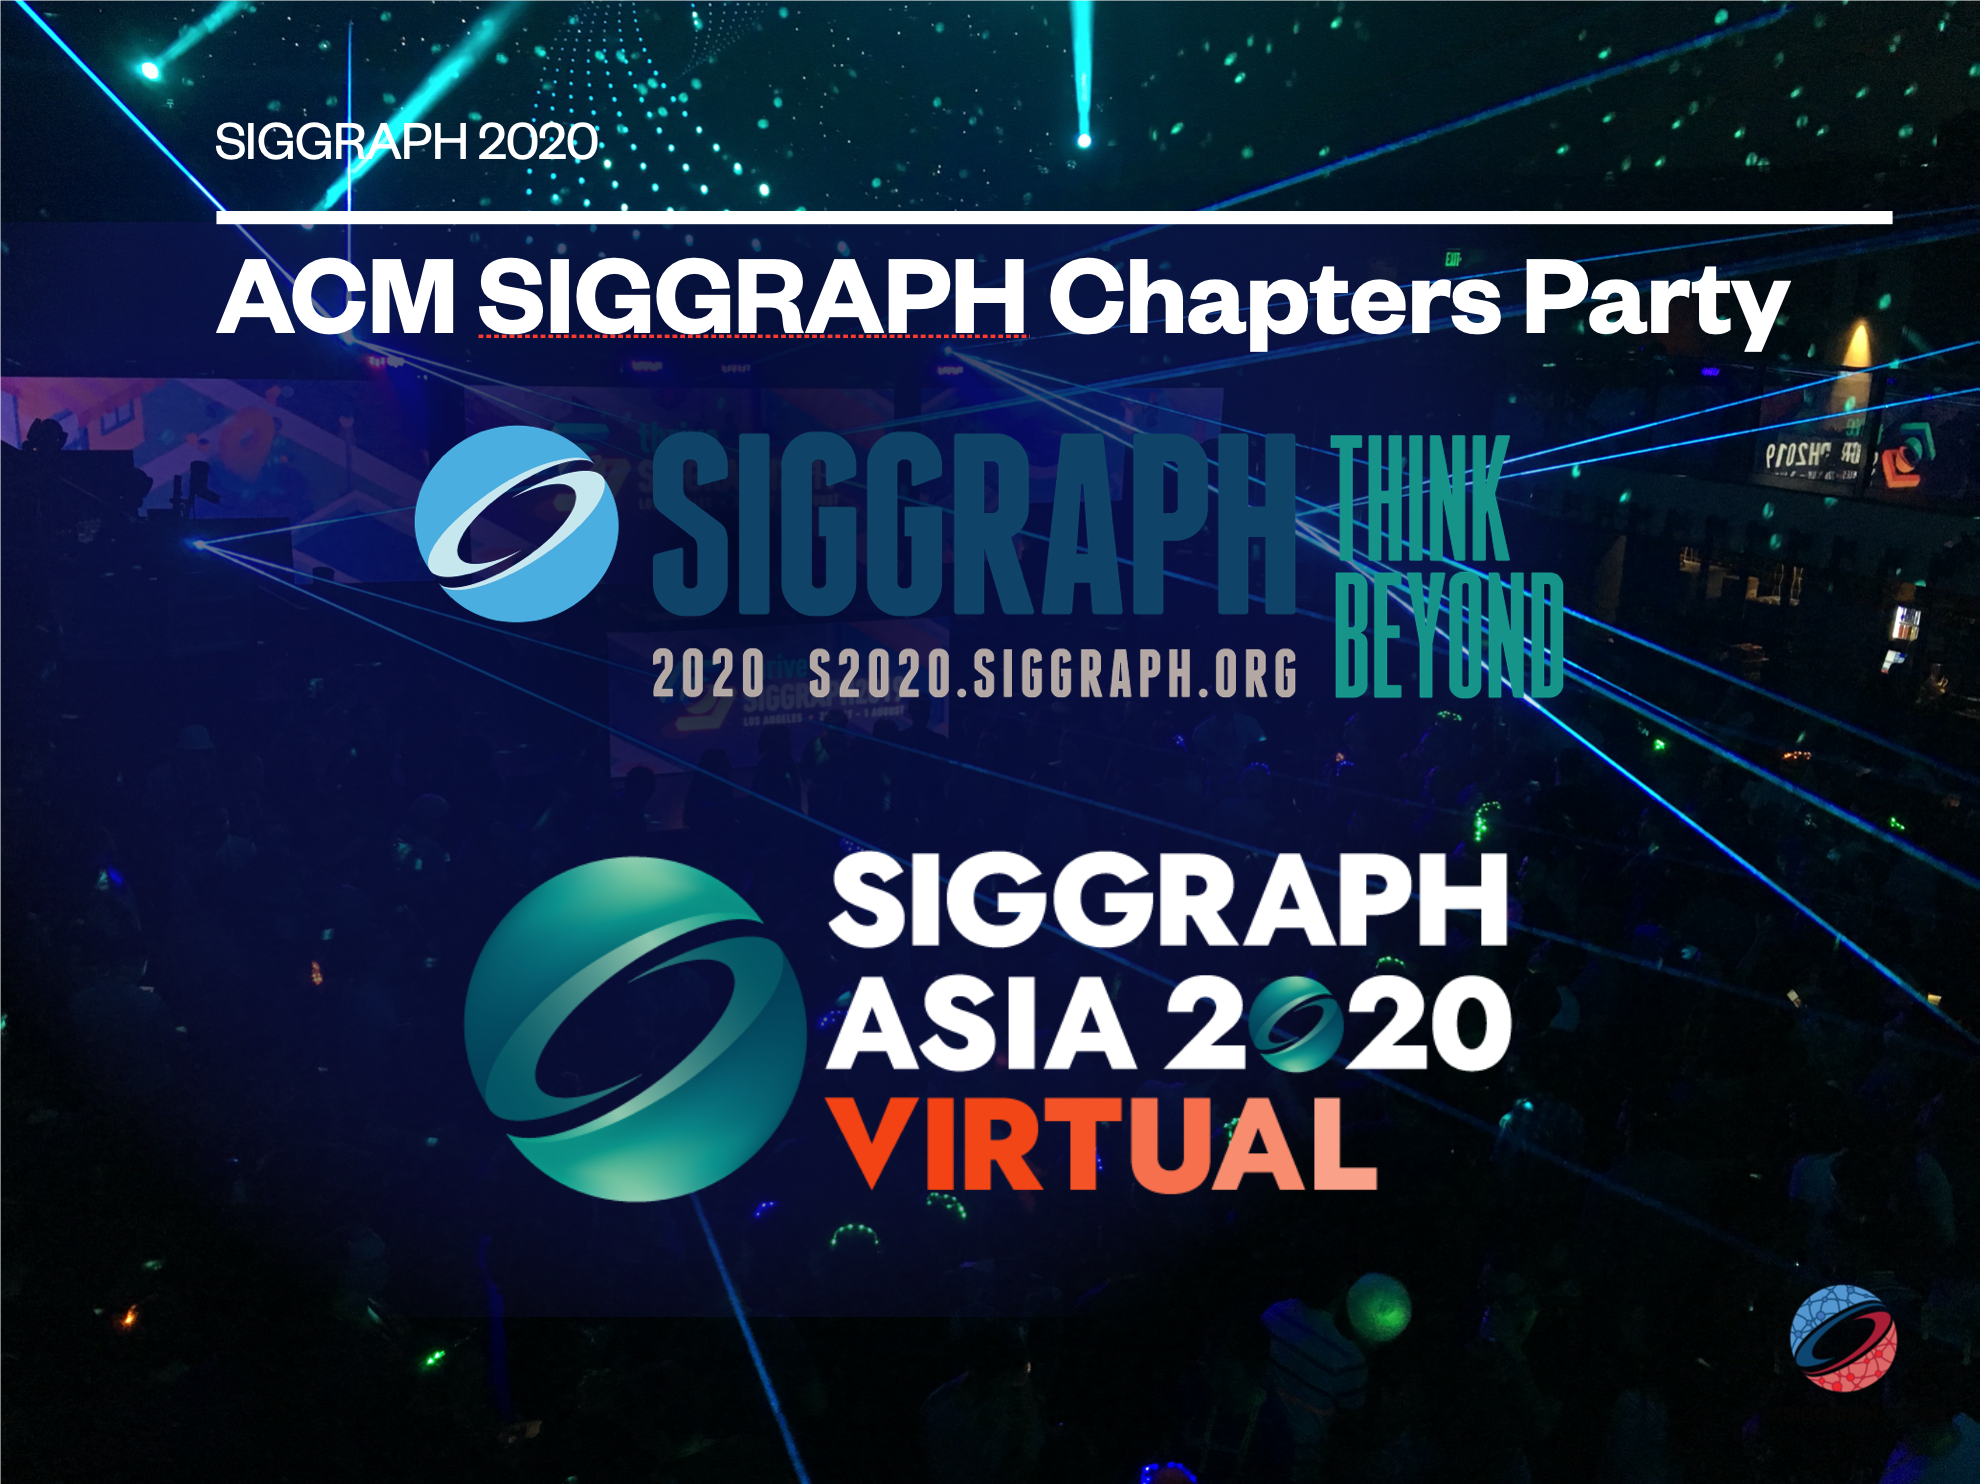 The ACM SIGGRAPH Chapters Party Finds a New (Virtual) Life in 2020